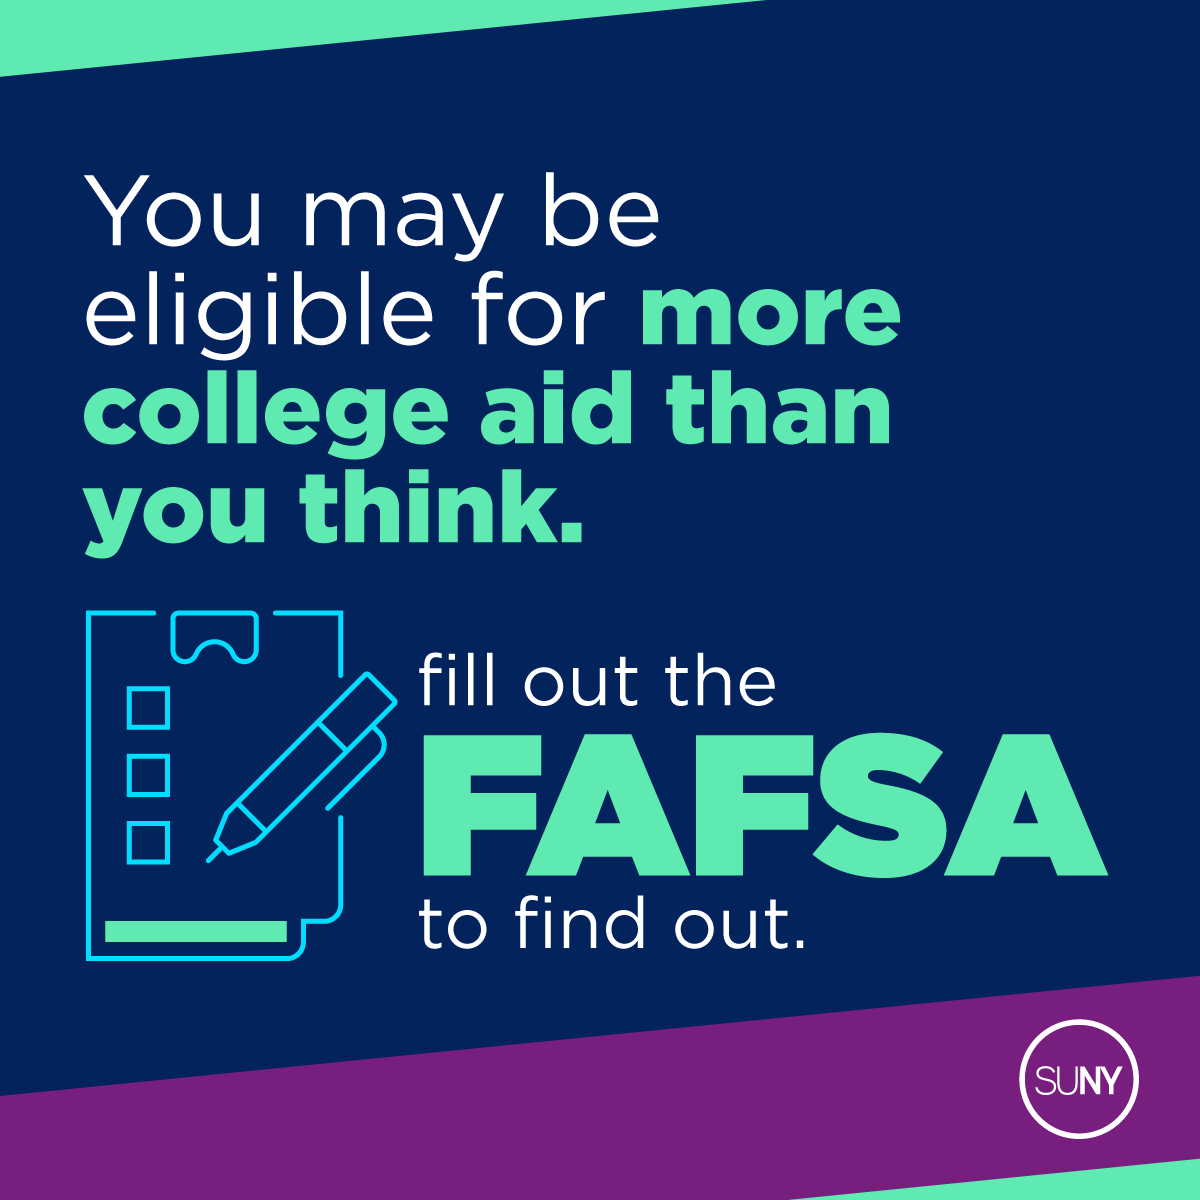 Ready to pursue your dreams? 🎓💡 You may be eligible for more college aid than you think. Complete your #FAFSA now and discover the possibilities! #FAFSAReady

hesc.ny.gov/fafsaready